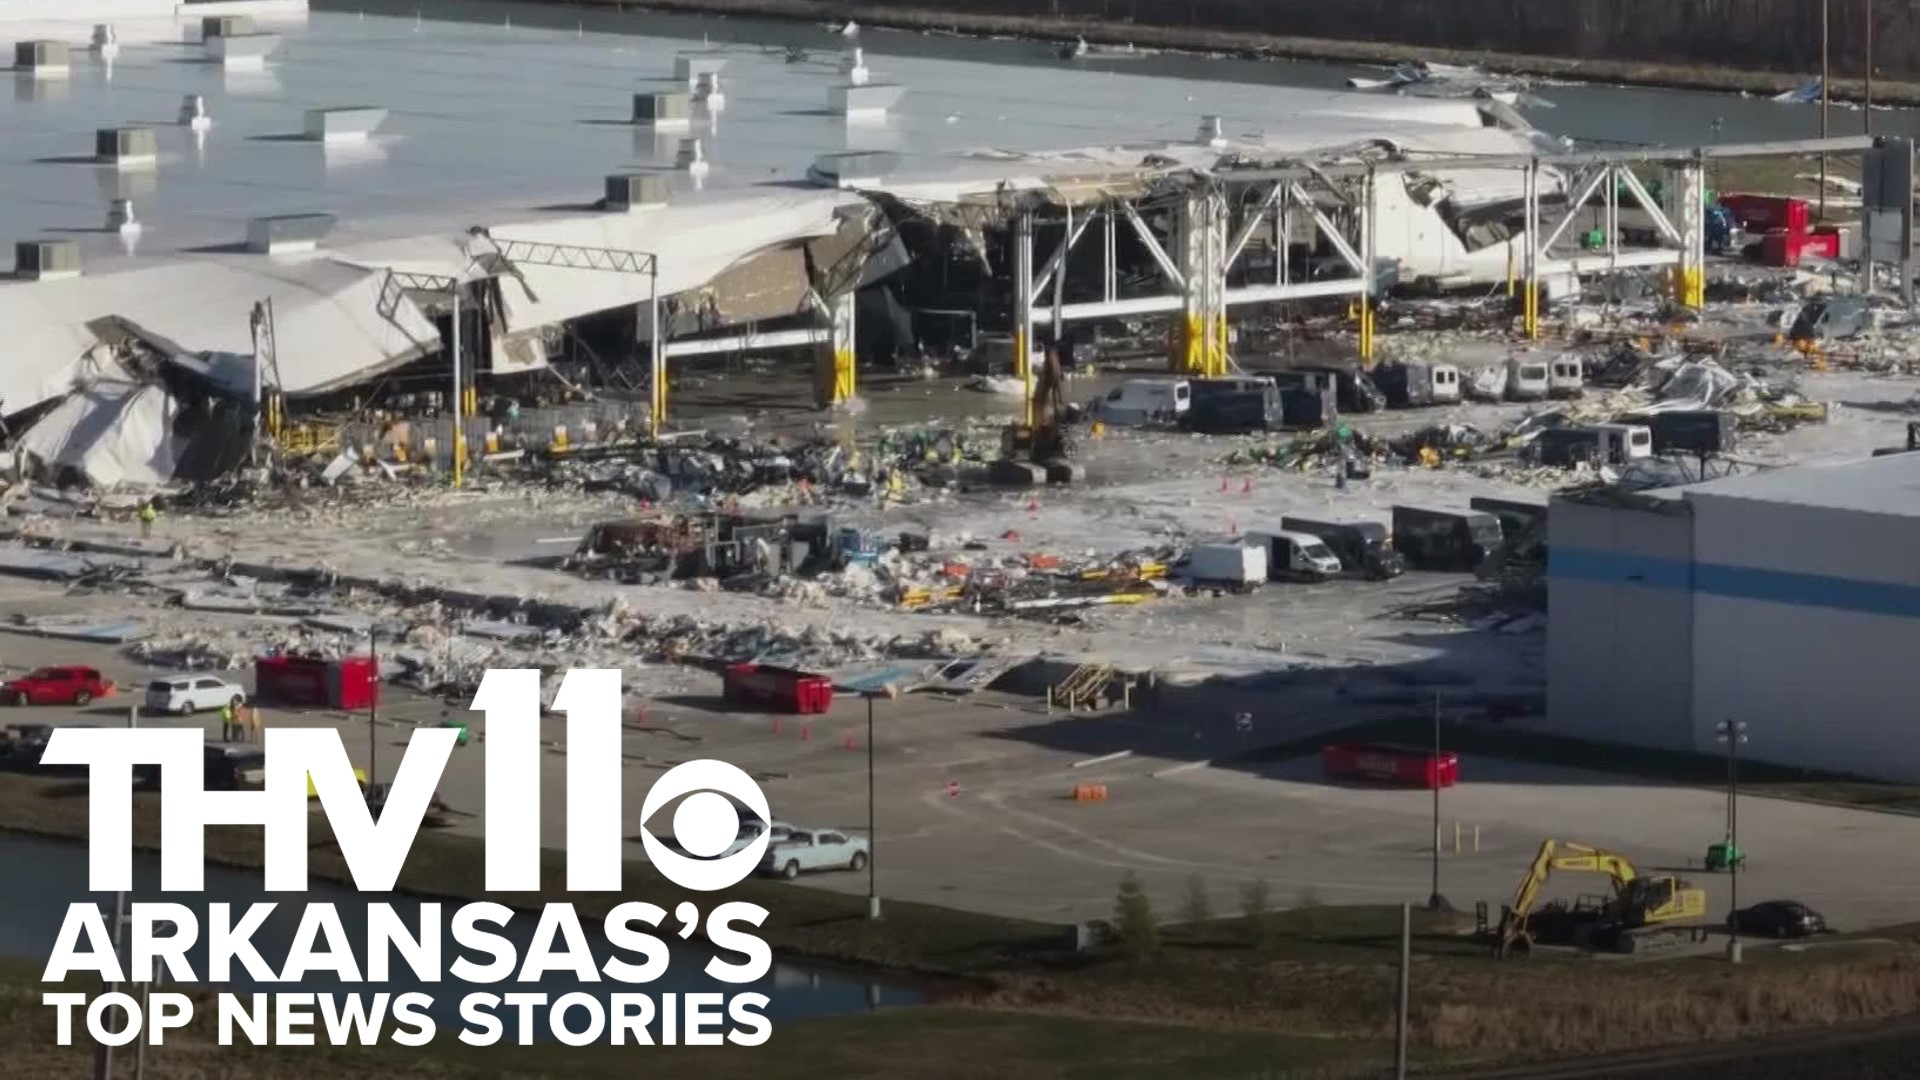 Michael Aaron delivers the top news stories for Tuesday, Dec. 14, 2021 including the latest on tornado recovery efforts and the special election in NWA.